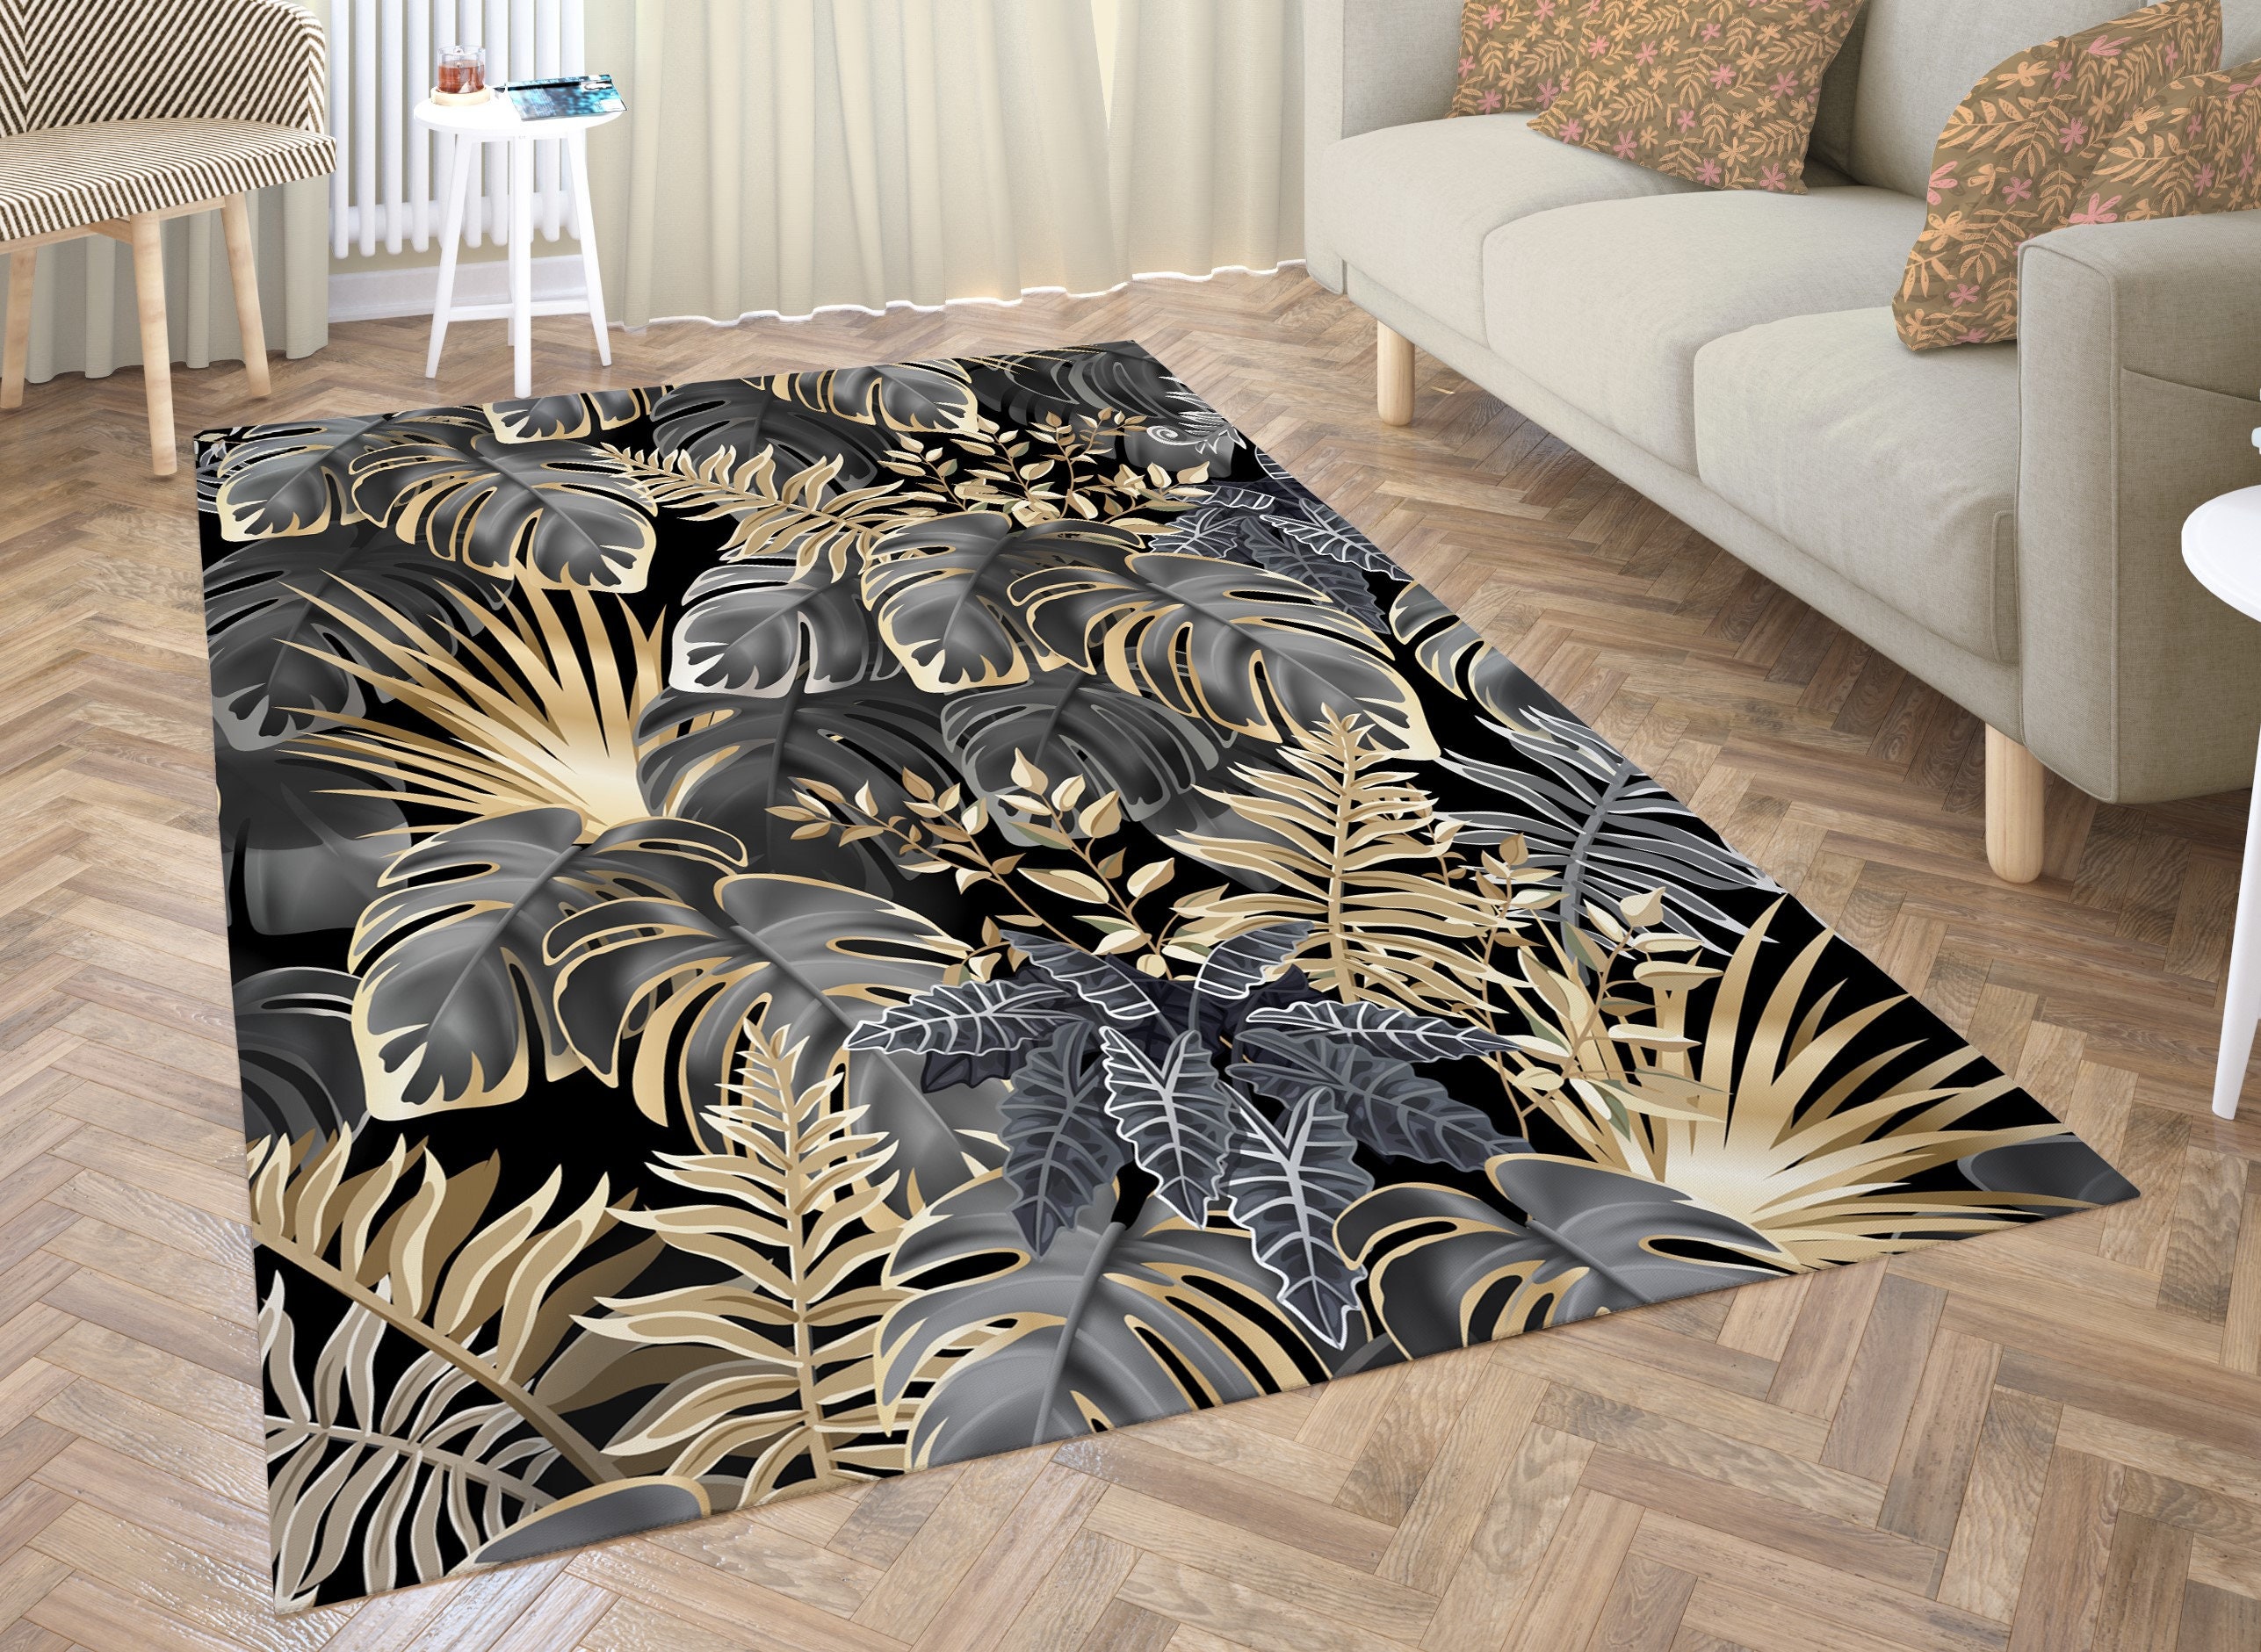 YEAHSPACE Palm Tree Leaf Rug 40 inch Round Rug Living Room Bedroom  Decor-Tropical Jungle Palm Tree Leaf Green